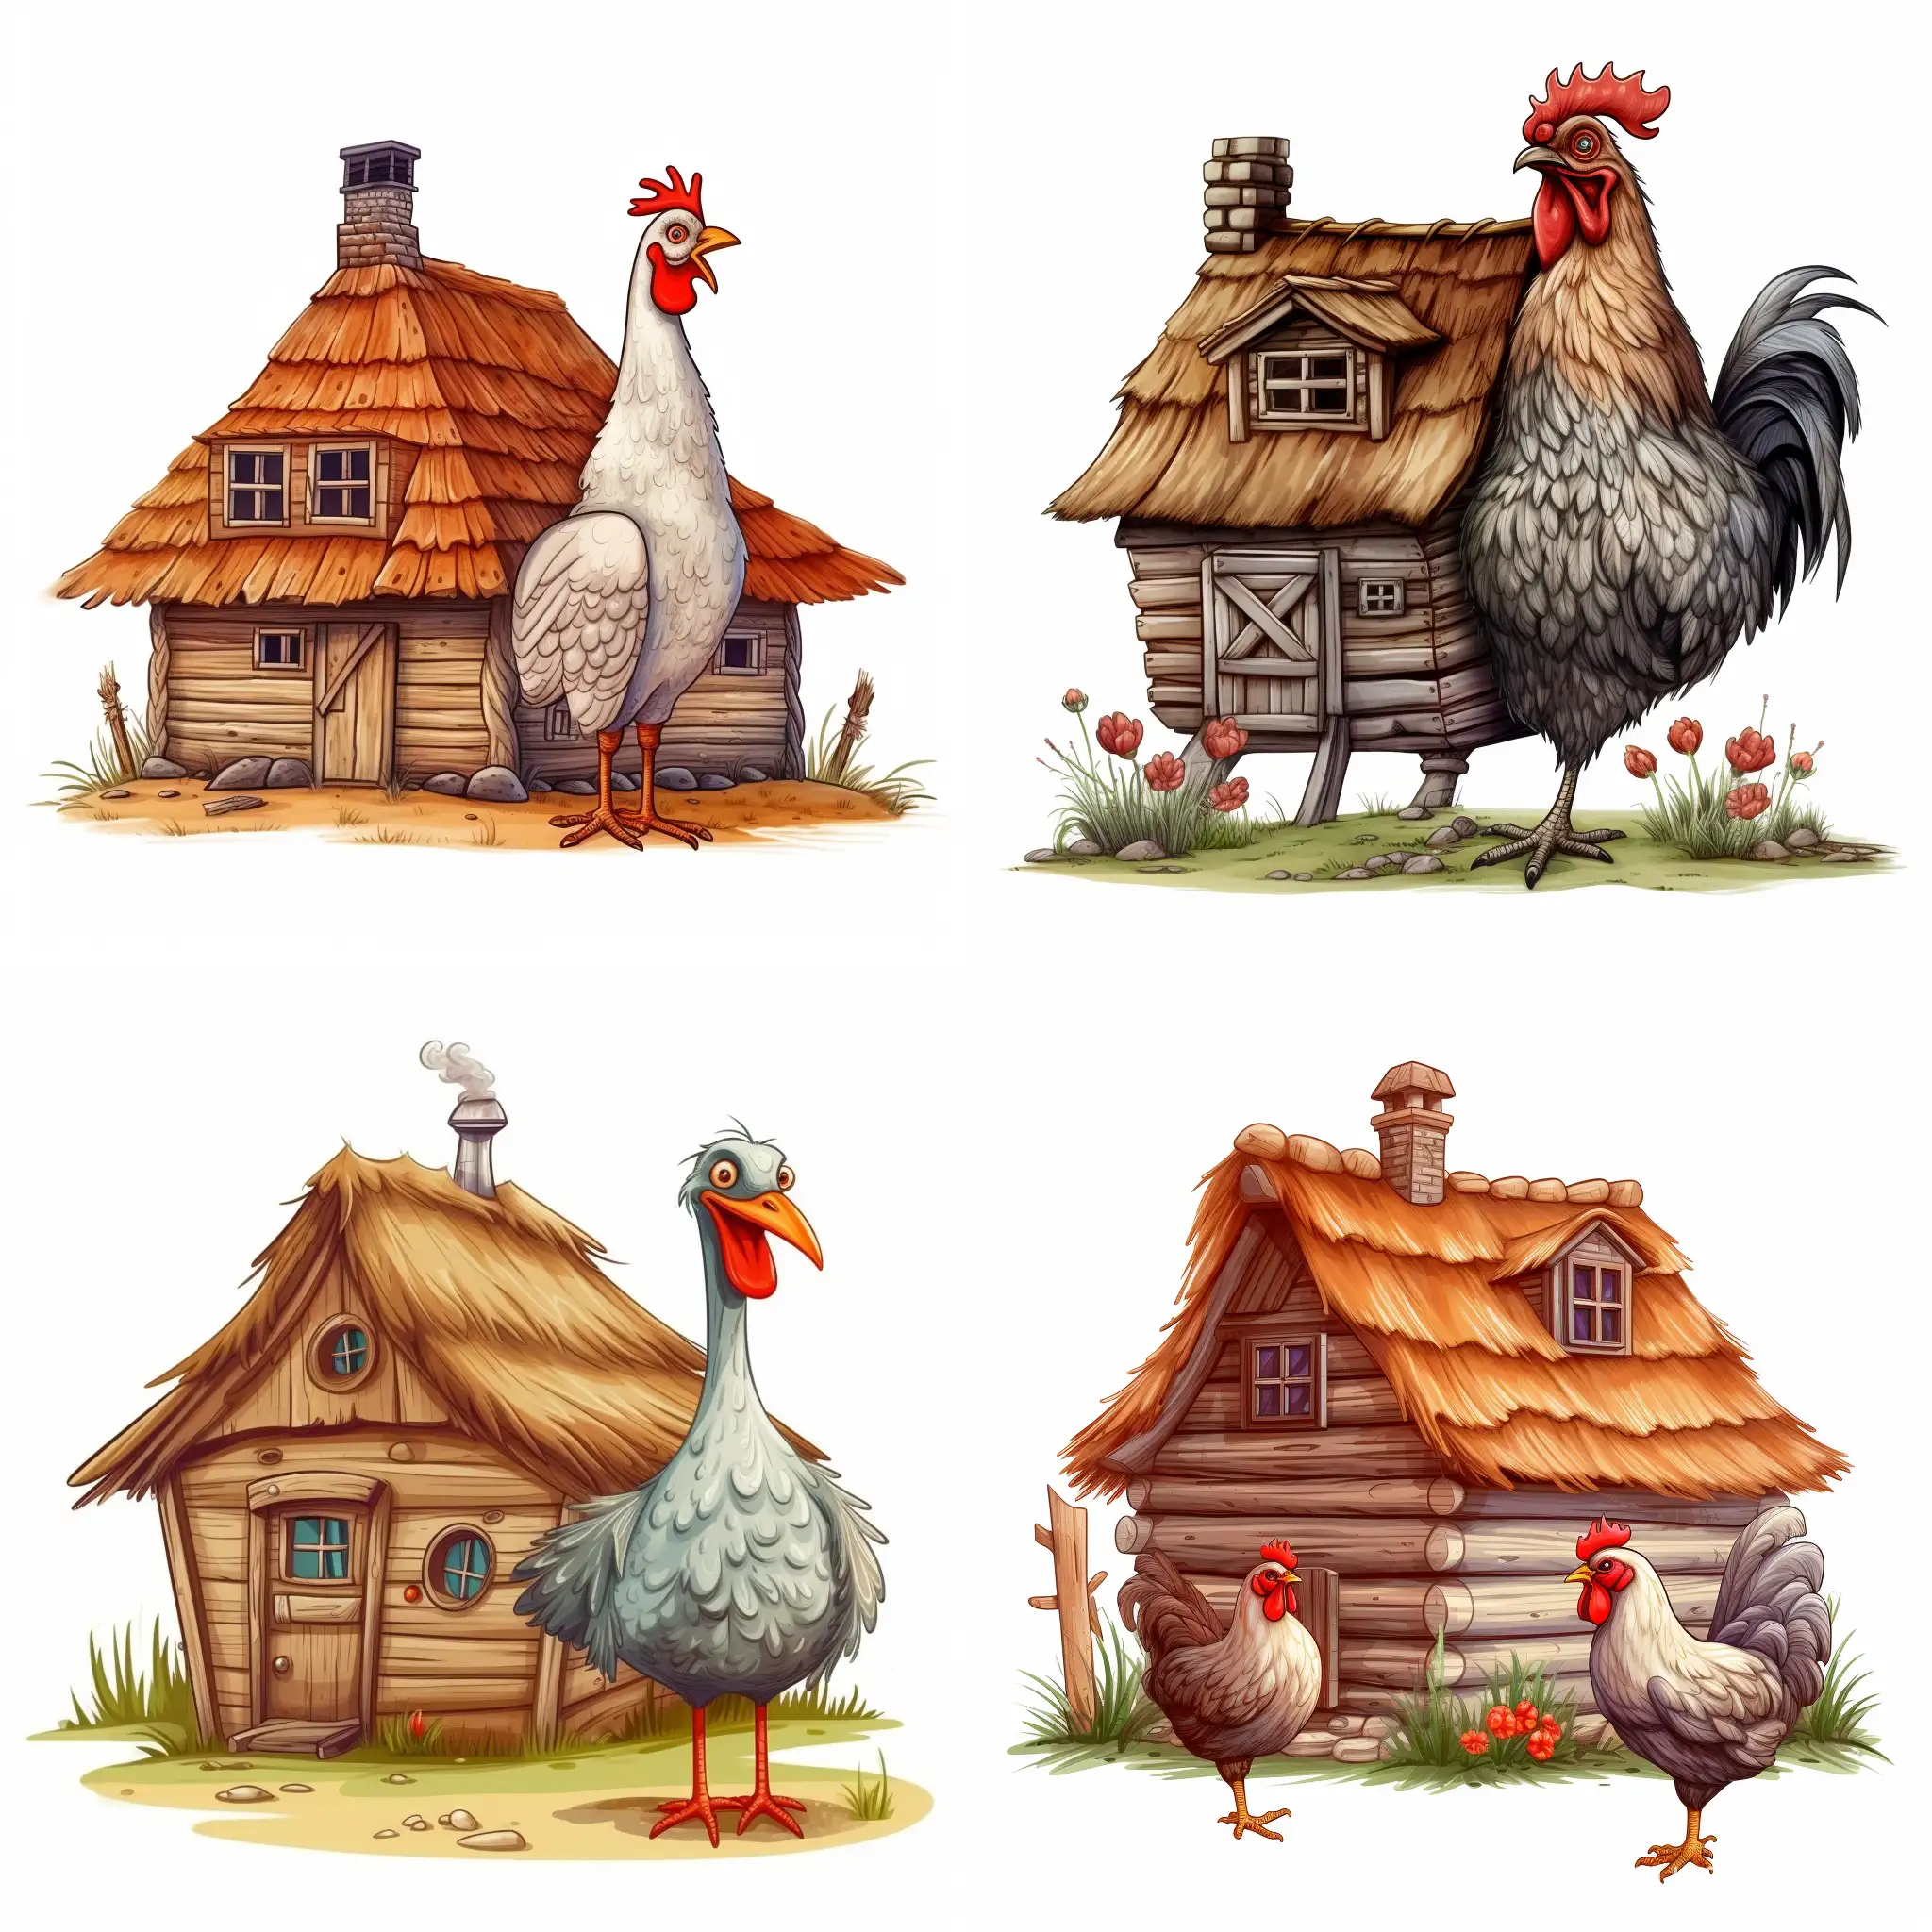 An old, small log house, with a roof of dry grass, stands on two large chicken legs, on a white background, cartoon style